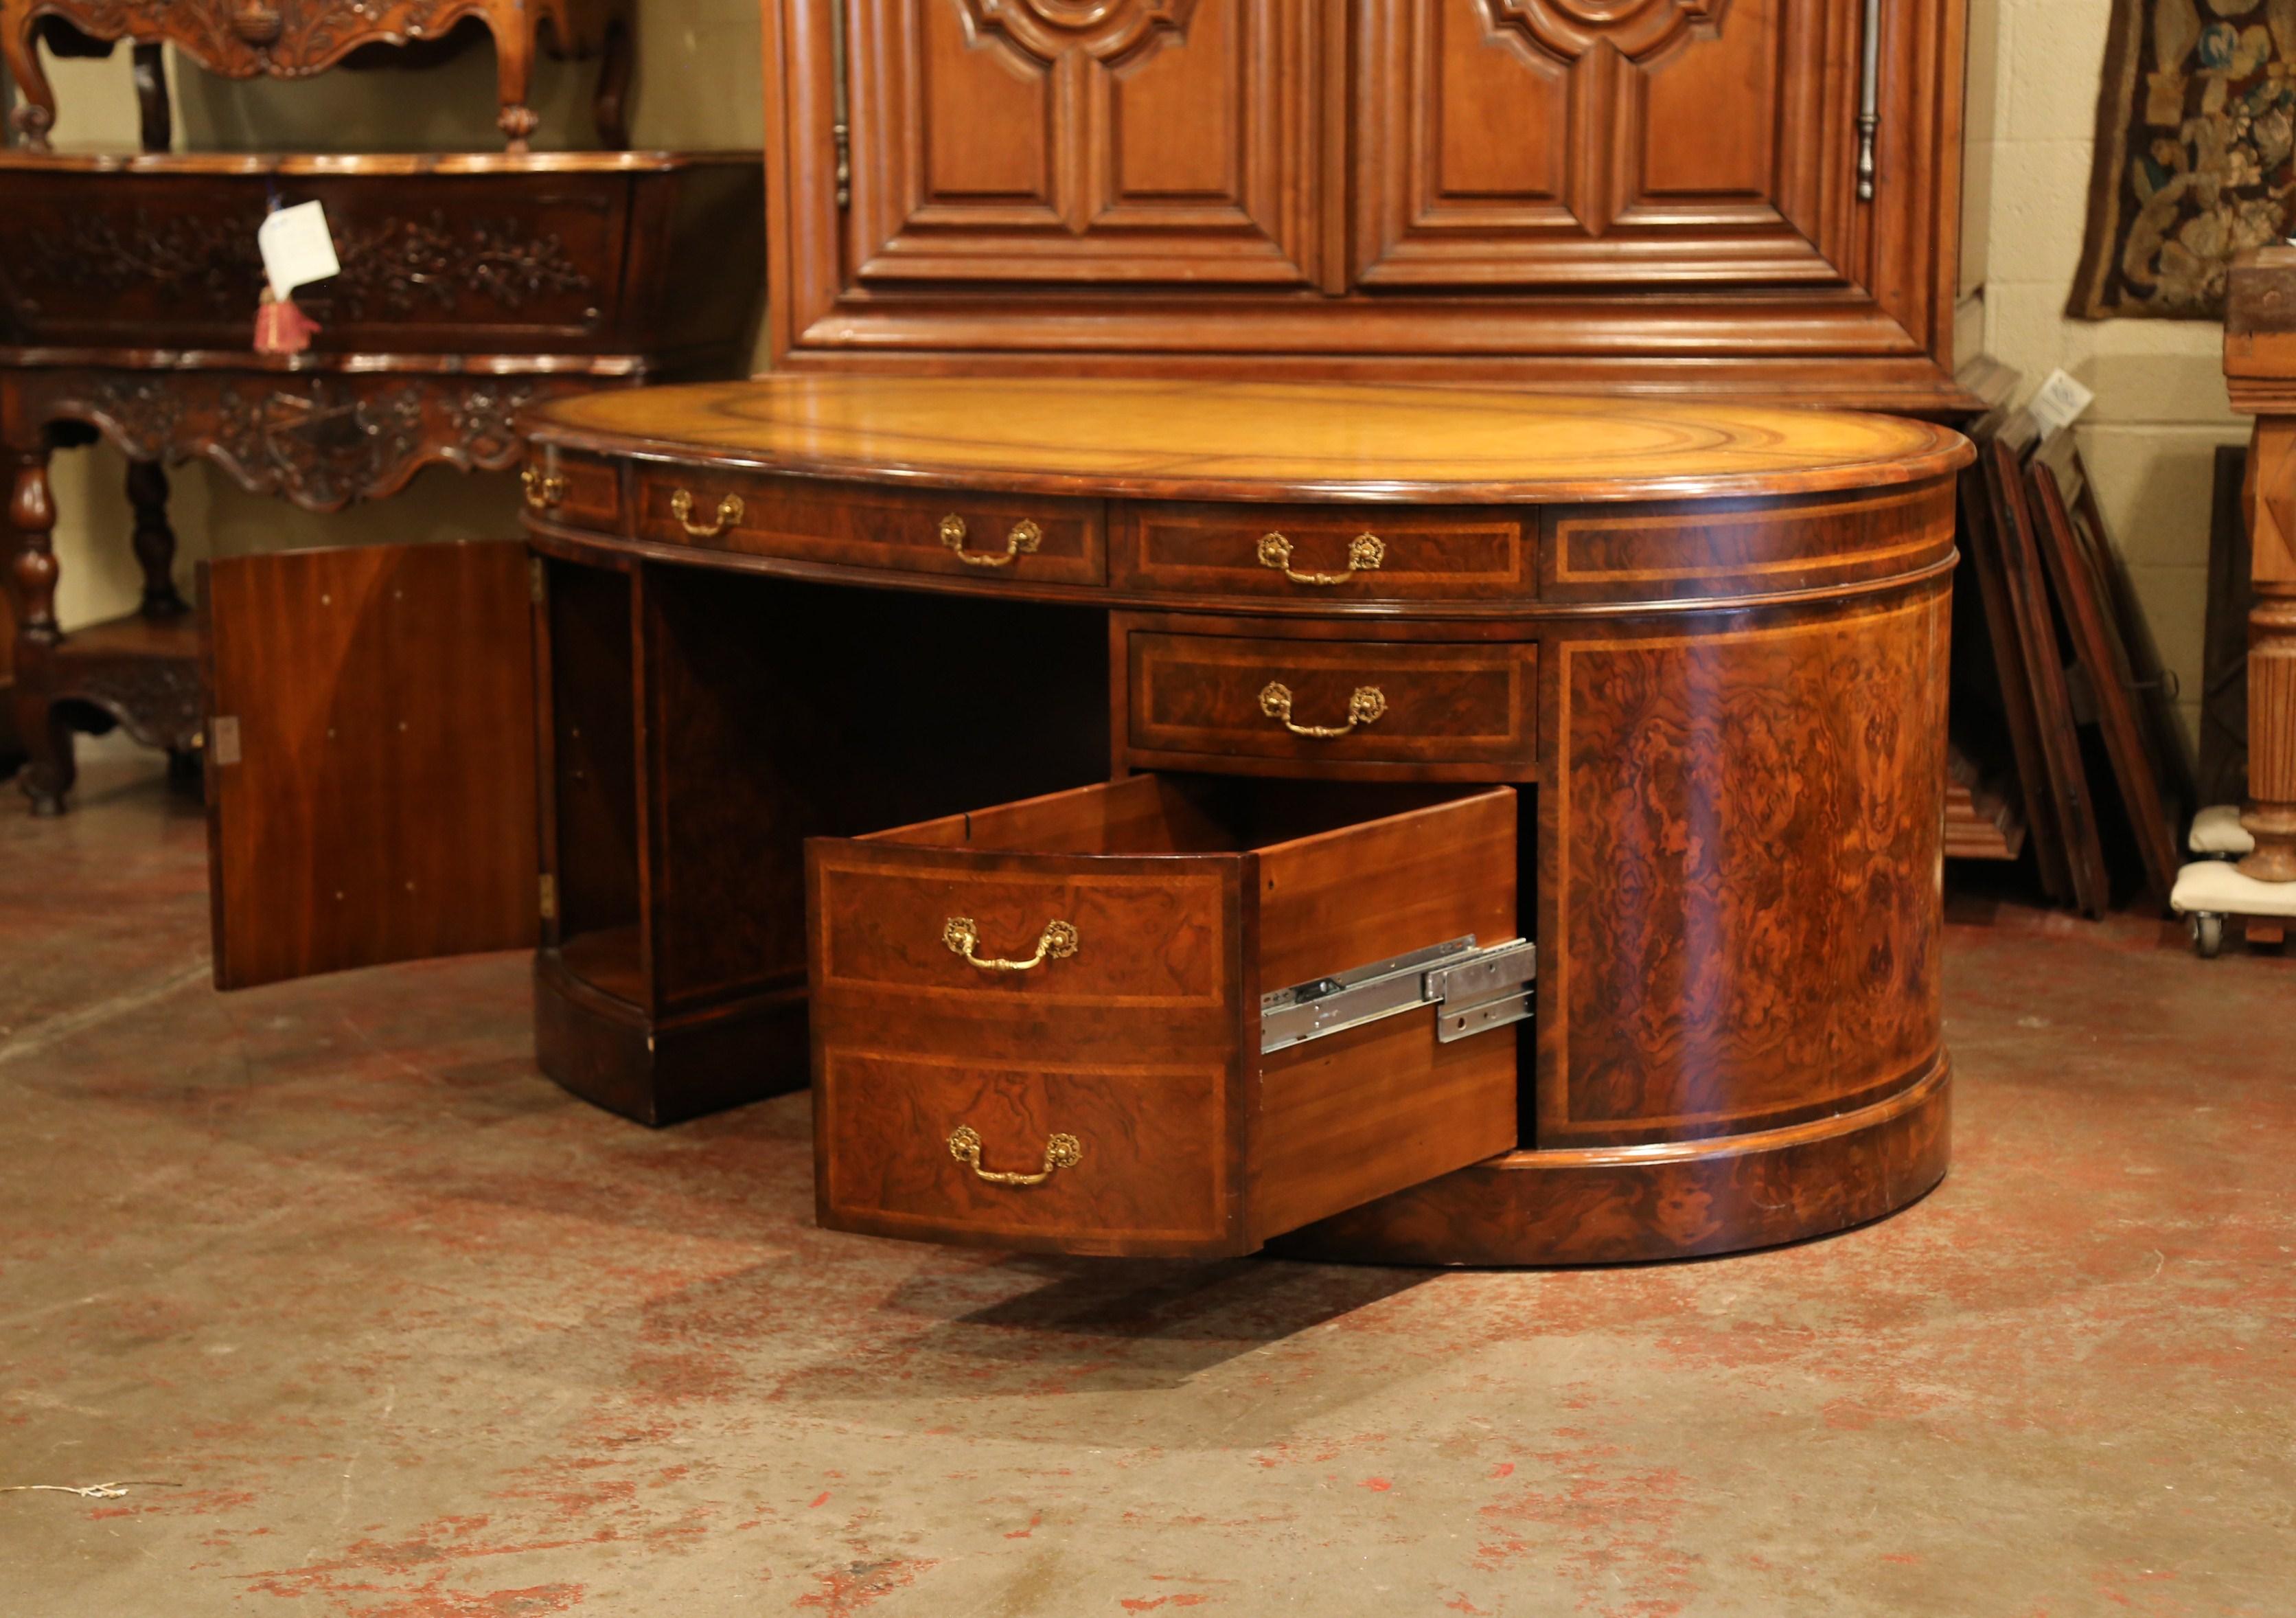 Contemporary Early 21st Century Walnut Oval Partner Desk with Leather Top by Maitland-Smith